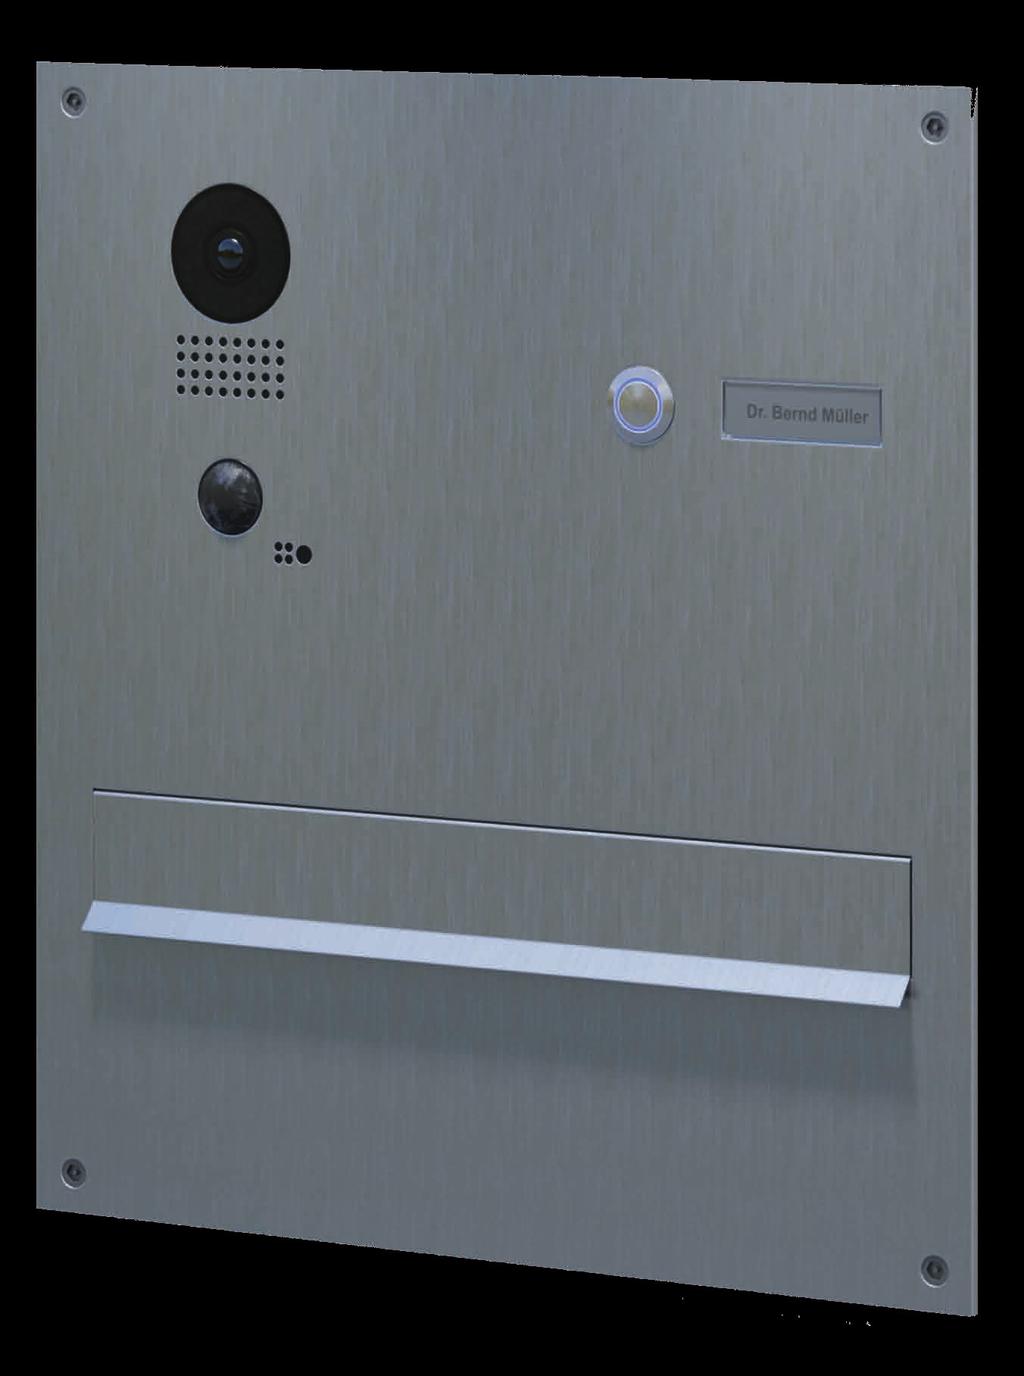 DB-D203 IP Intercom Flush Postbox Edition Dimensions: L350mm x W320mm x D380mm The DB-D203 combines ease of use & convenience with both audio & video push notifications directly to your smartphone.